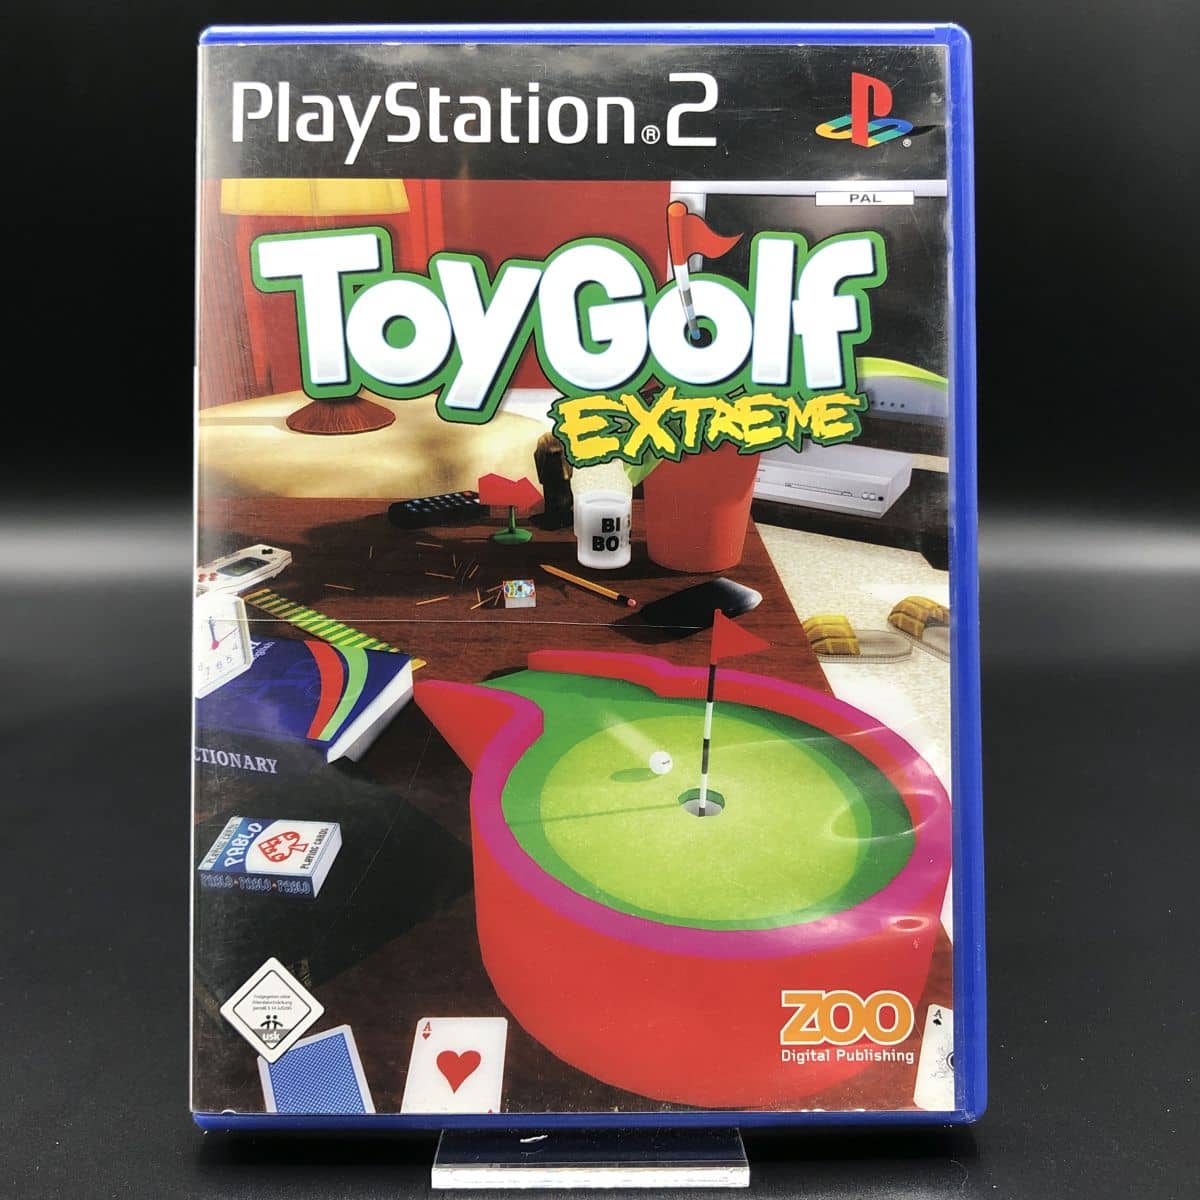 PS2 Toy Golf Extreme (Komplett) (Sehr gut) Sony PlayStation 2